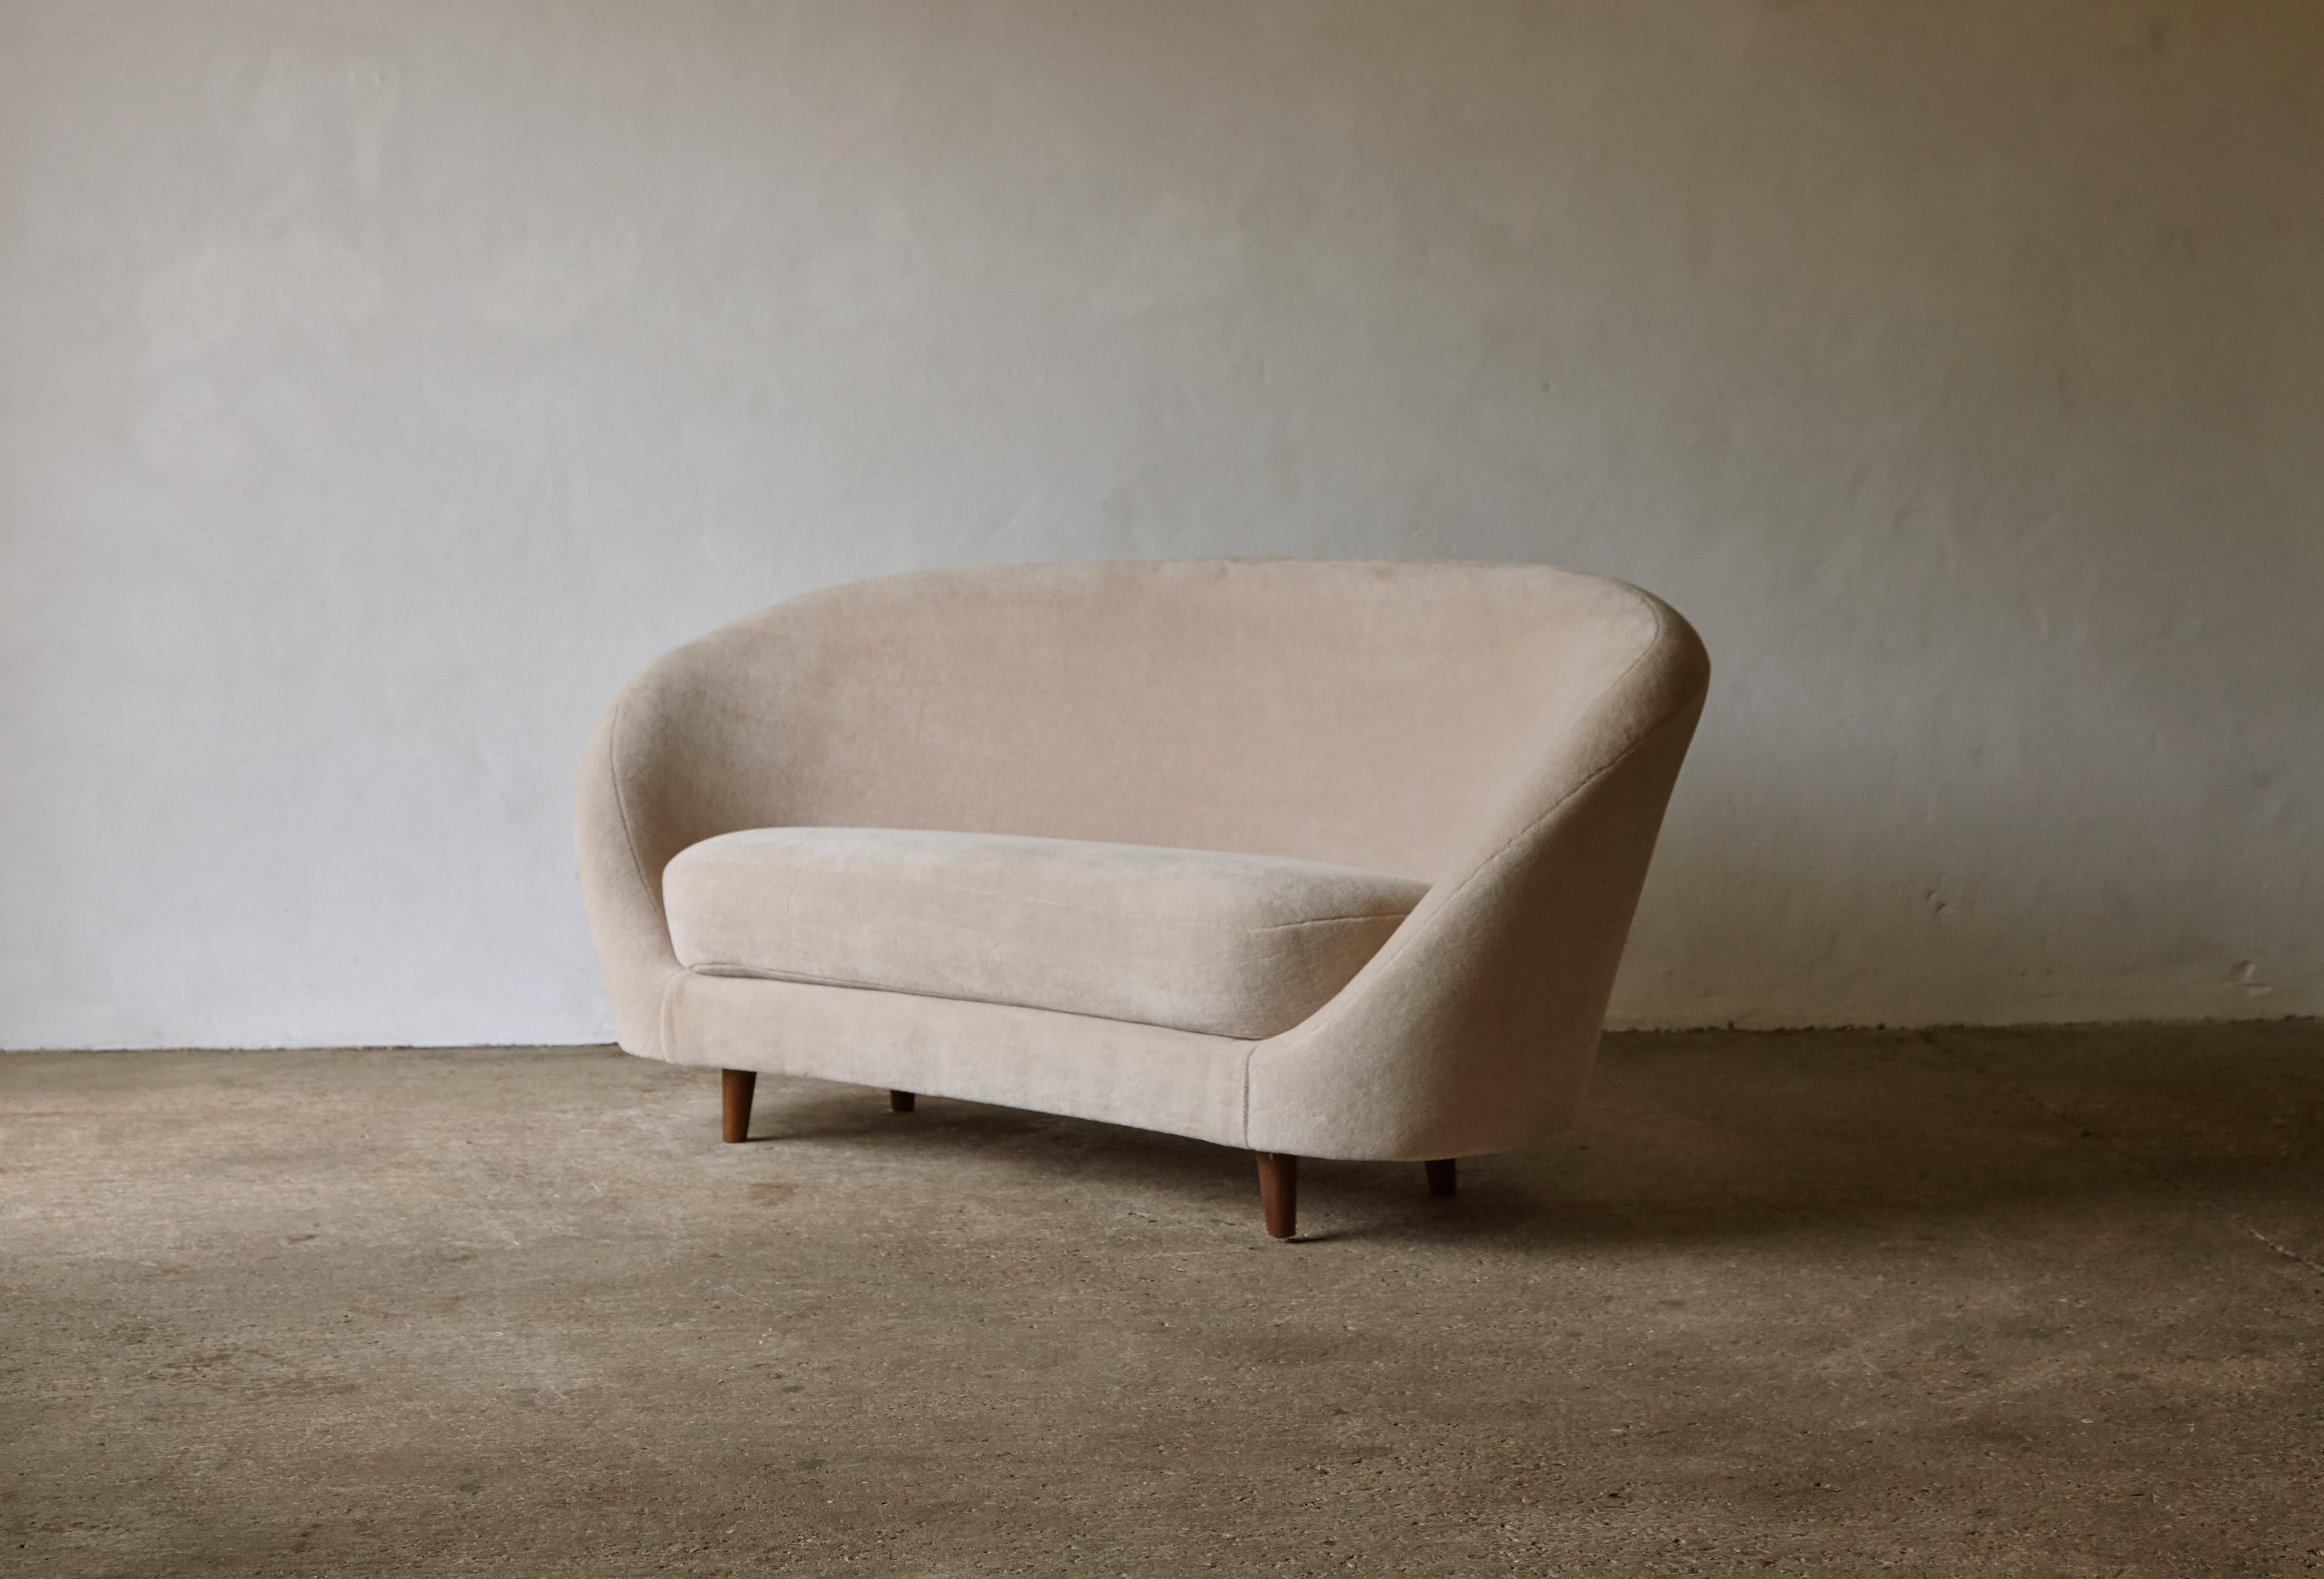 Mid-Century Modern Curved Egg Shape Sofa, in the Style of Ico Parisi, Italy, 1950s / 60s For Sale